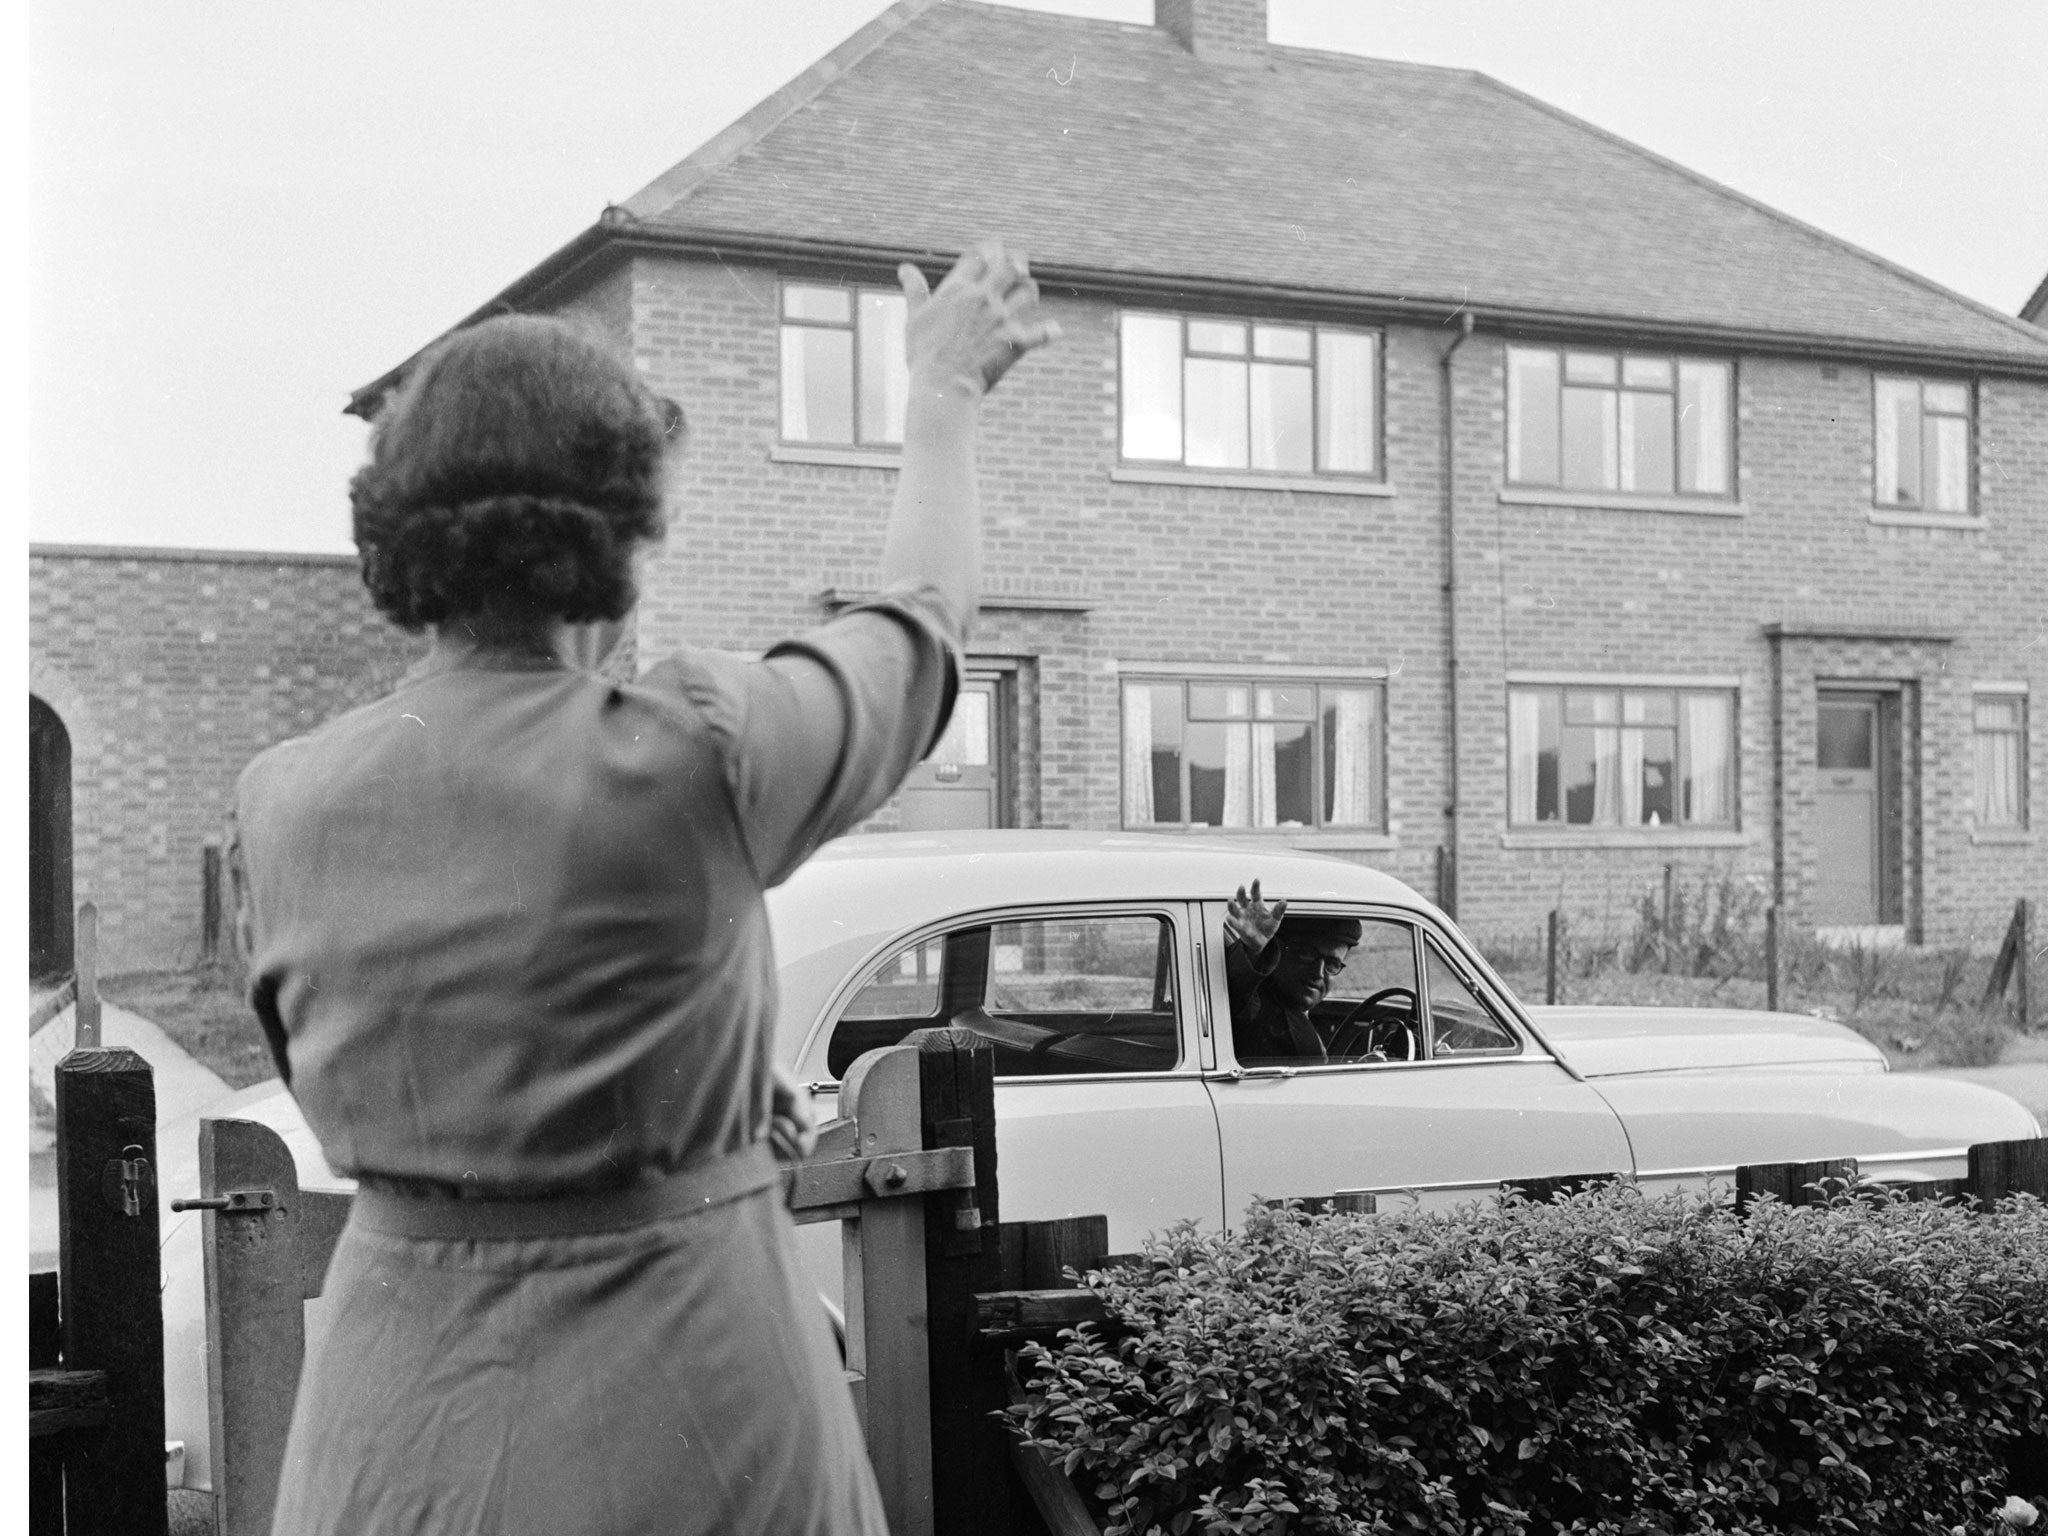 9th November 1956:Bernard Bradbury of Hinckley in Leicestershire waves goodbye to his wife as he leaves for work in his new Wolseley. Mr Bradbury recently won? 15,000 in the Littlewoods pools but has continued to drive a tractor for a local factory.